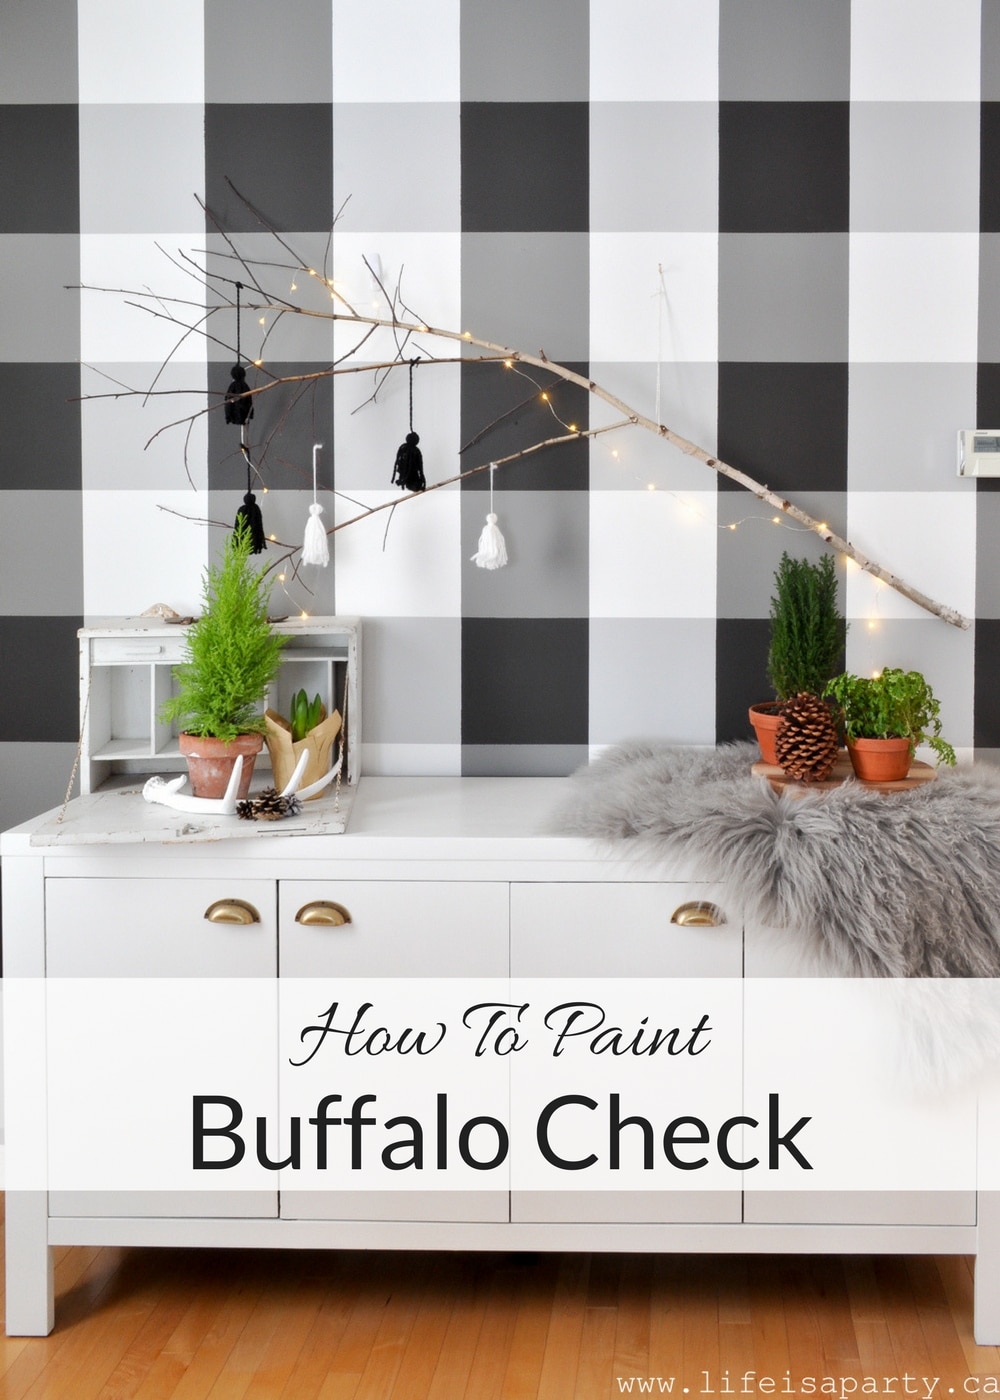 How To Make Plaid Painted Walls -add some drama to any space by painting buffalo check plaid on a feature wall, easy weekend DIY project.